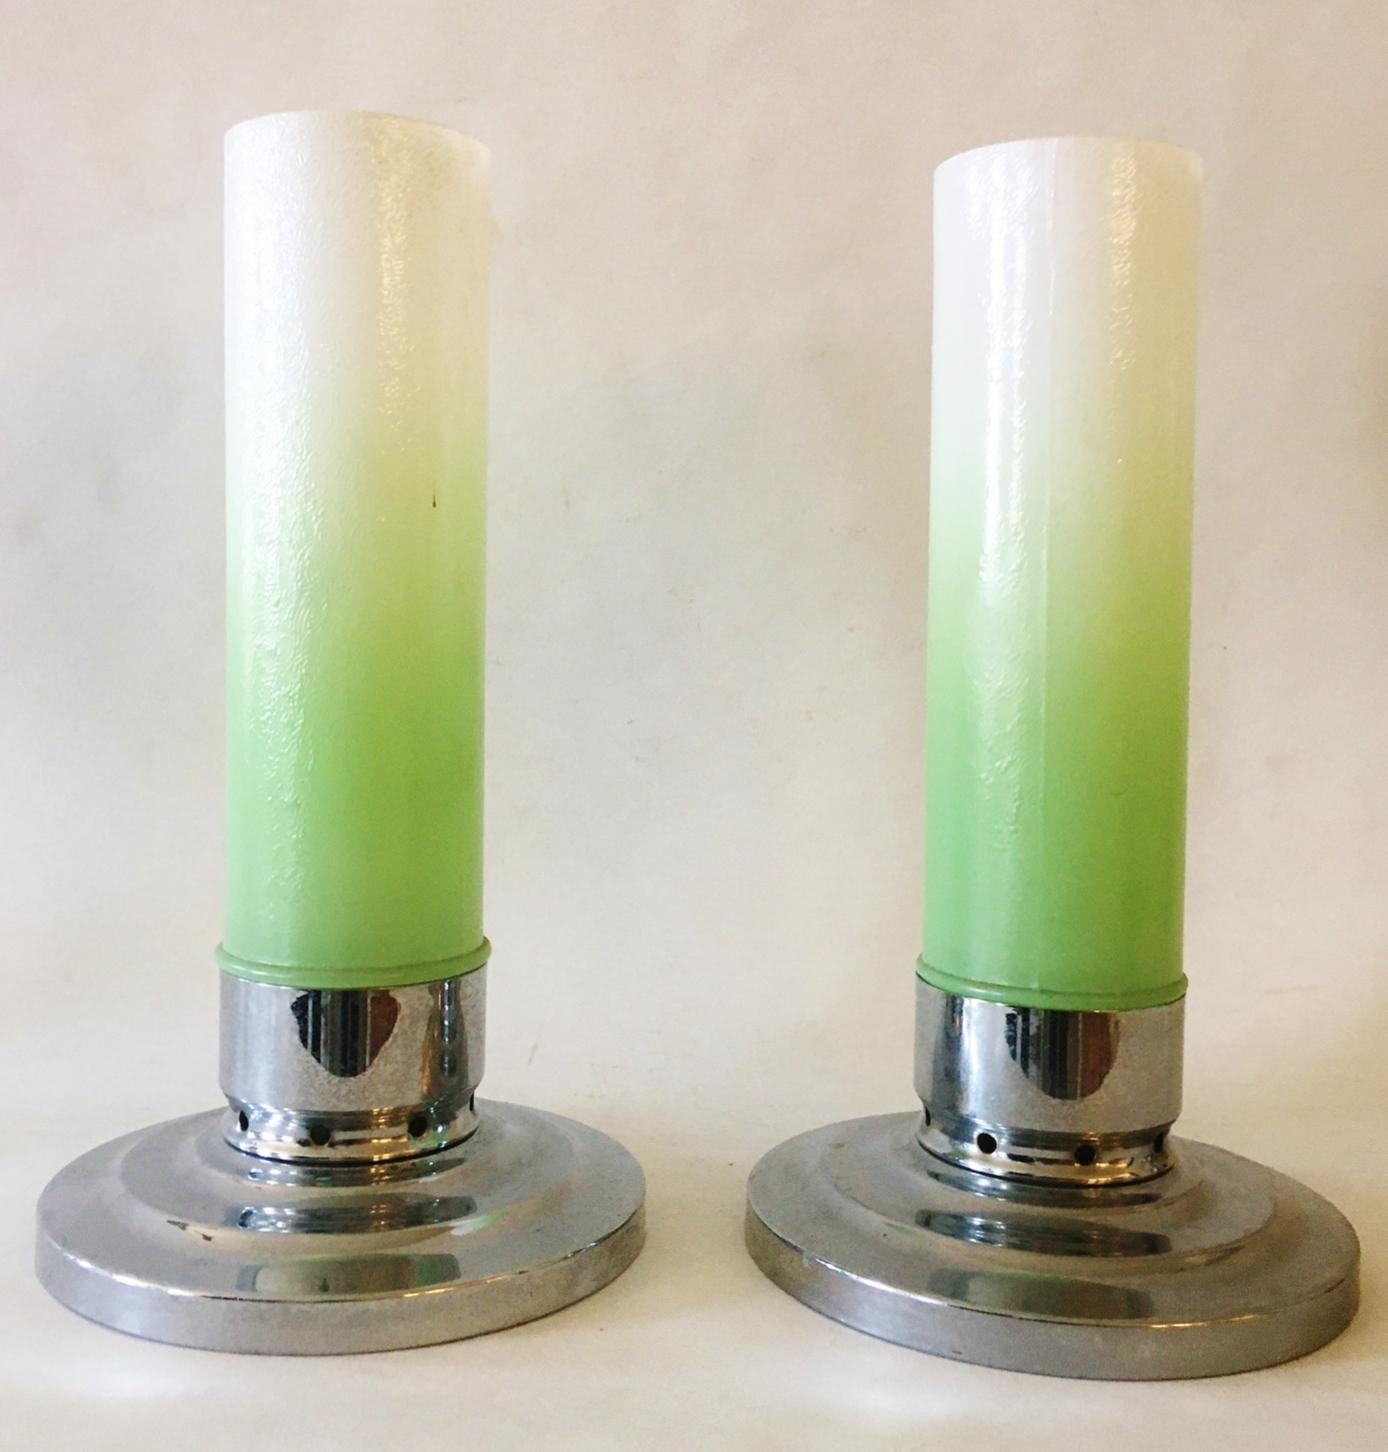 This pair of American Art Deco chrome and glass shaded candle holders were produced by F.T, Haffner Company of Chicago. The shades is particular pair are in green and white vignetted glass with a polished chrome stepped disk base. Over the years we